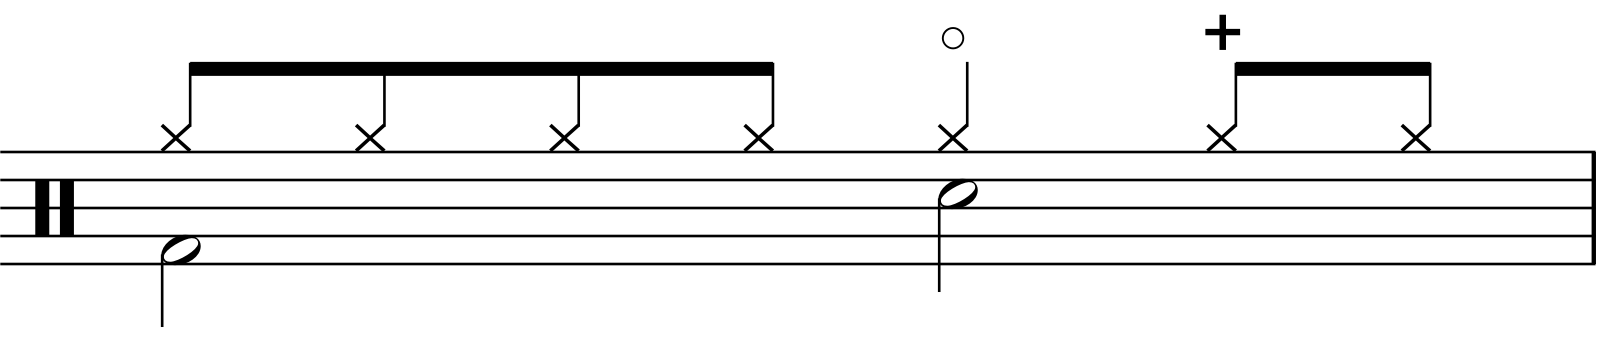 A half time groove with an open hi hat on count 3.